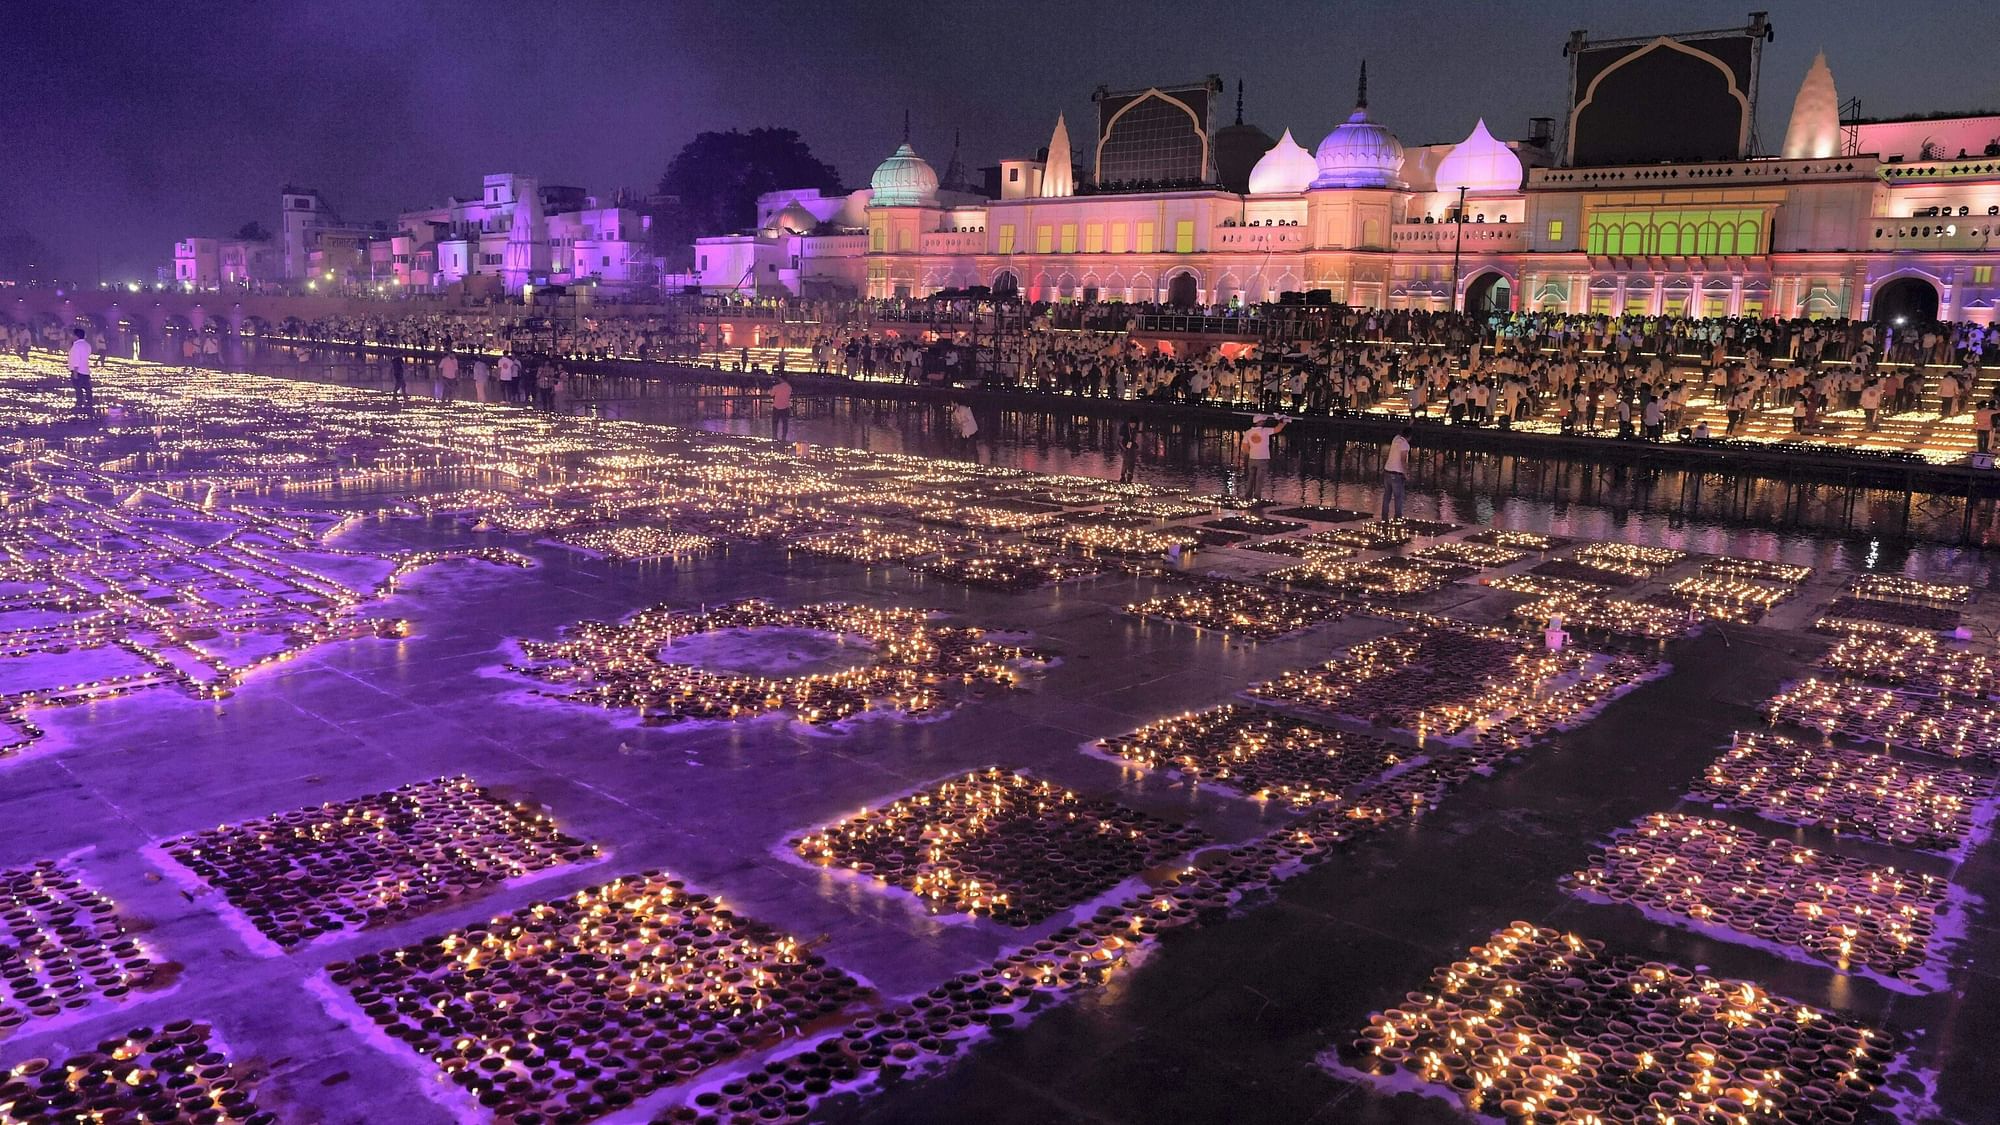 Ayodhya Sets Guinness World Record by Lighting Over 15 Lakh Diyas